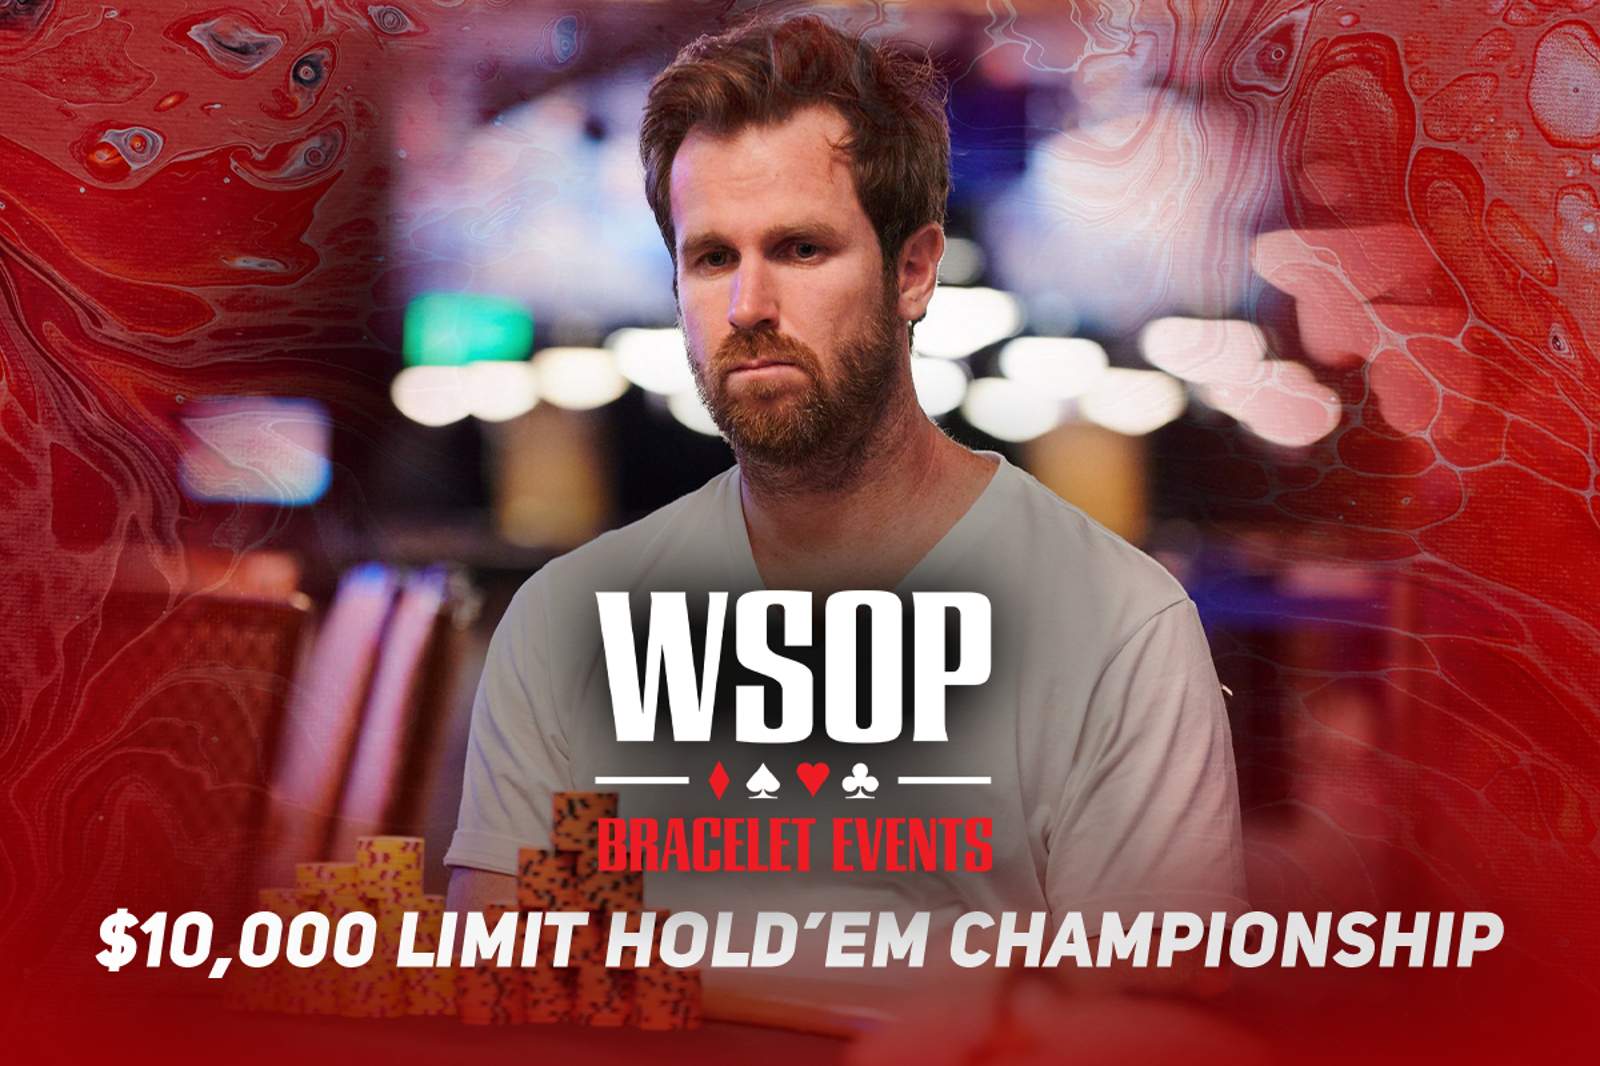 Watch the WSOP Event #16: $10,000 Limit Hold'em Championship Final Table on PokerGO.com at 8 p.m. ET